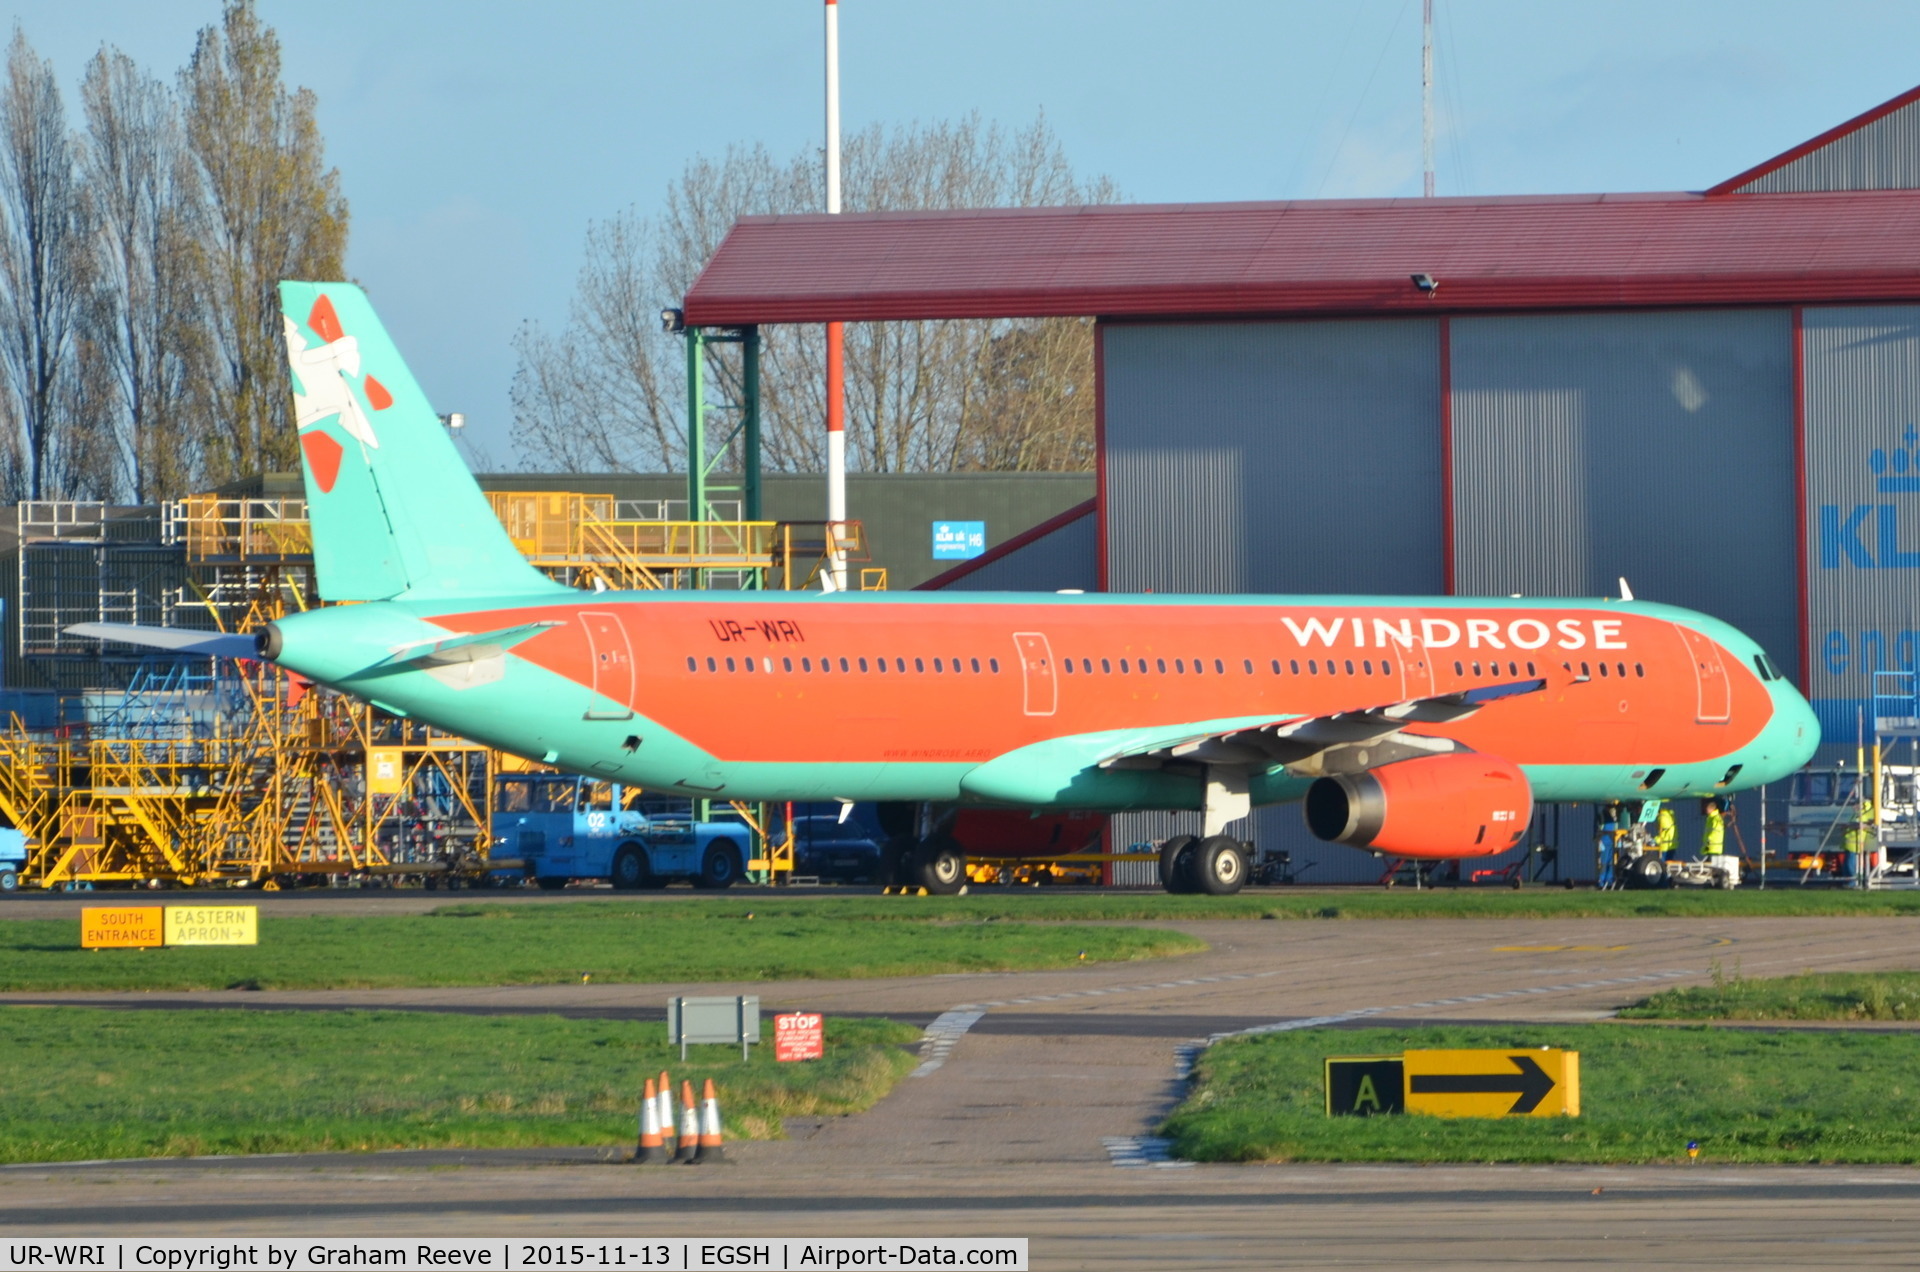 UR-WRI, 2006 Airbus A321-231 C/N 2682, Parked at Norwich.